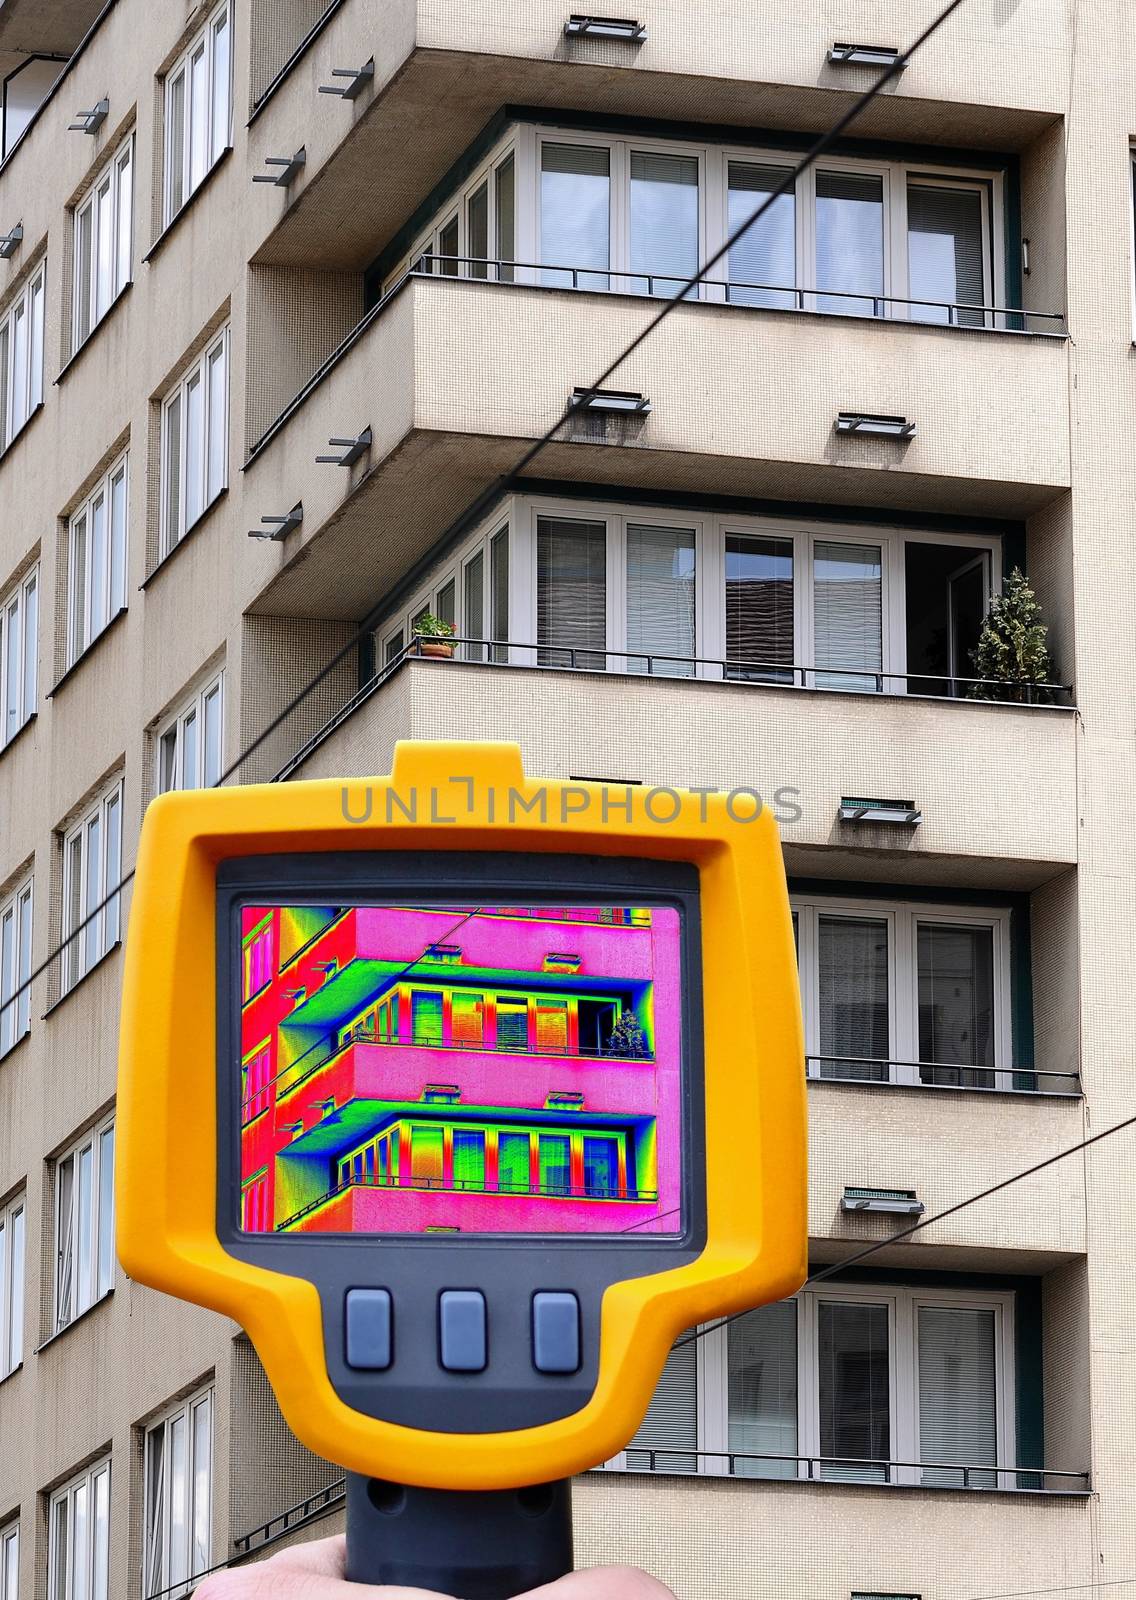 Recording Heat Loss of the Block of Flats with Infrared Thermal Camera in Hand. 